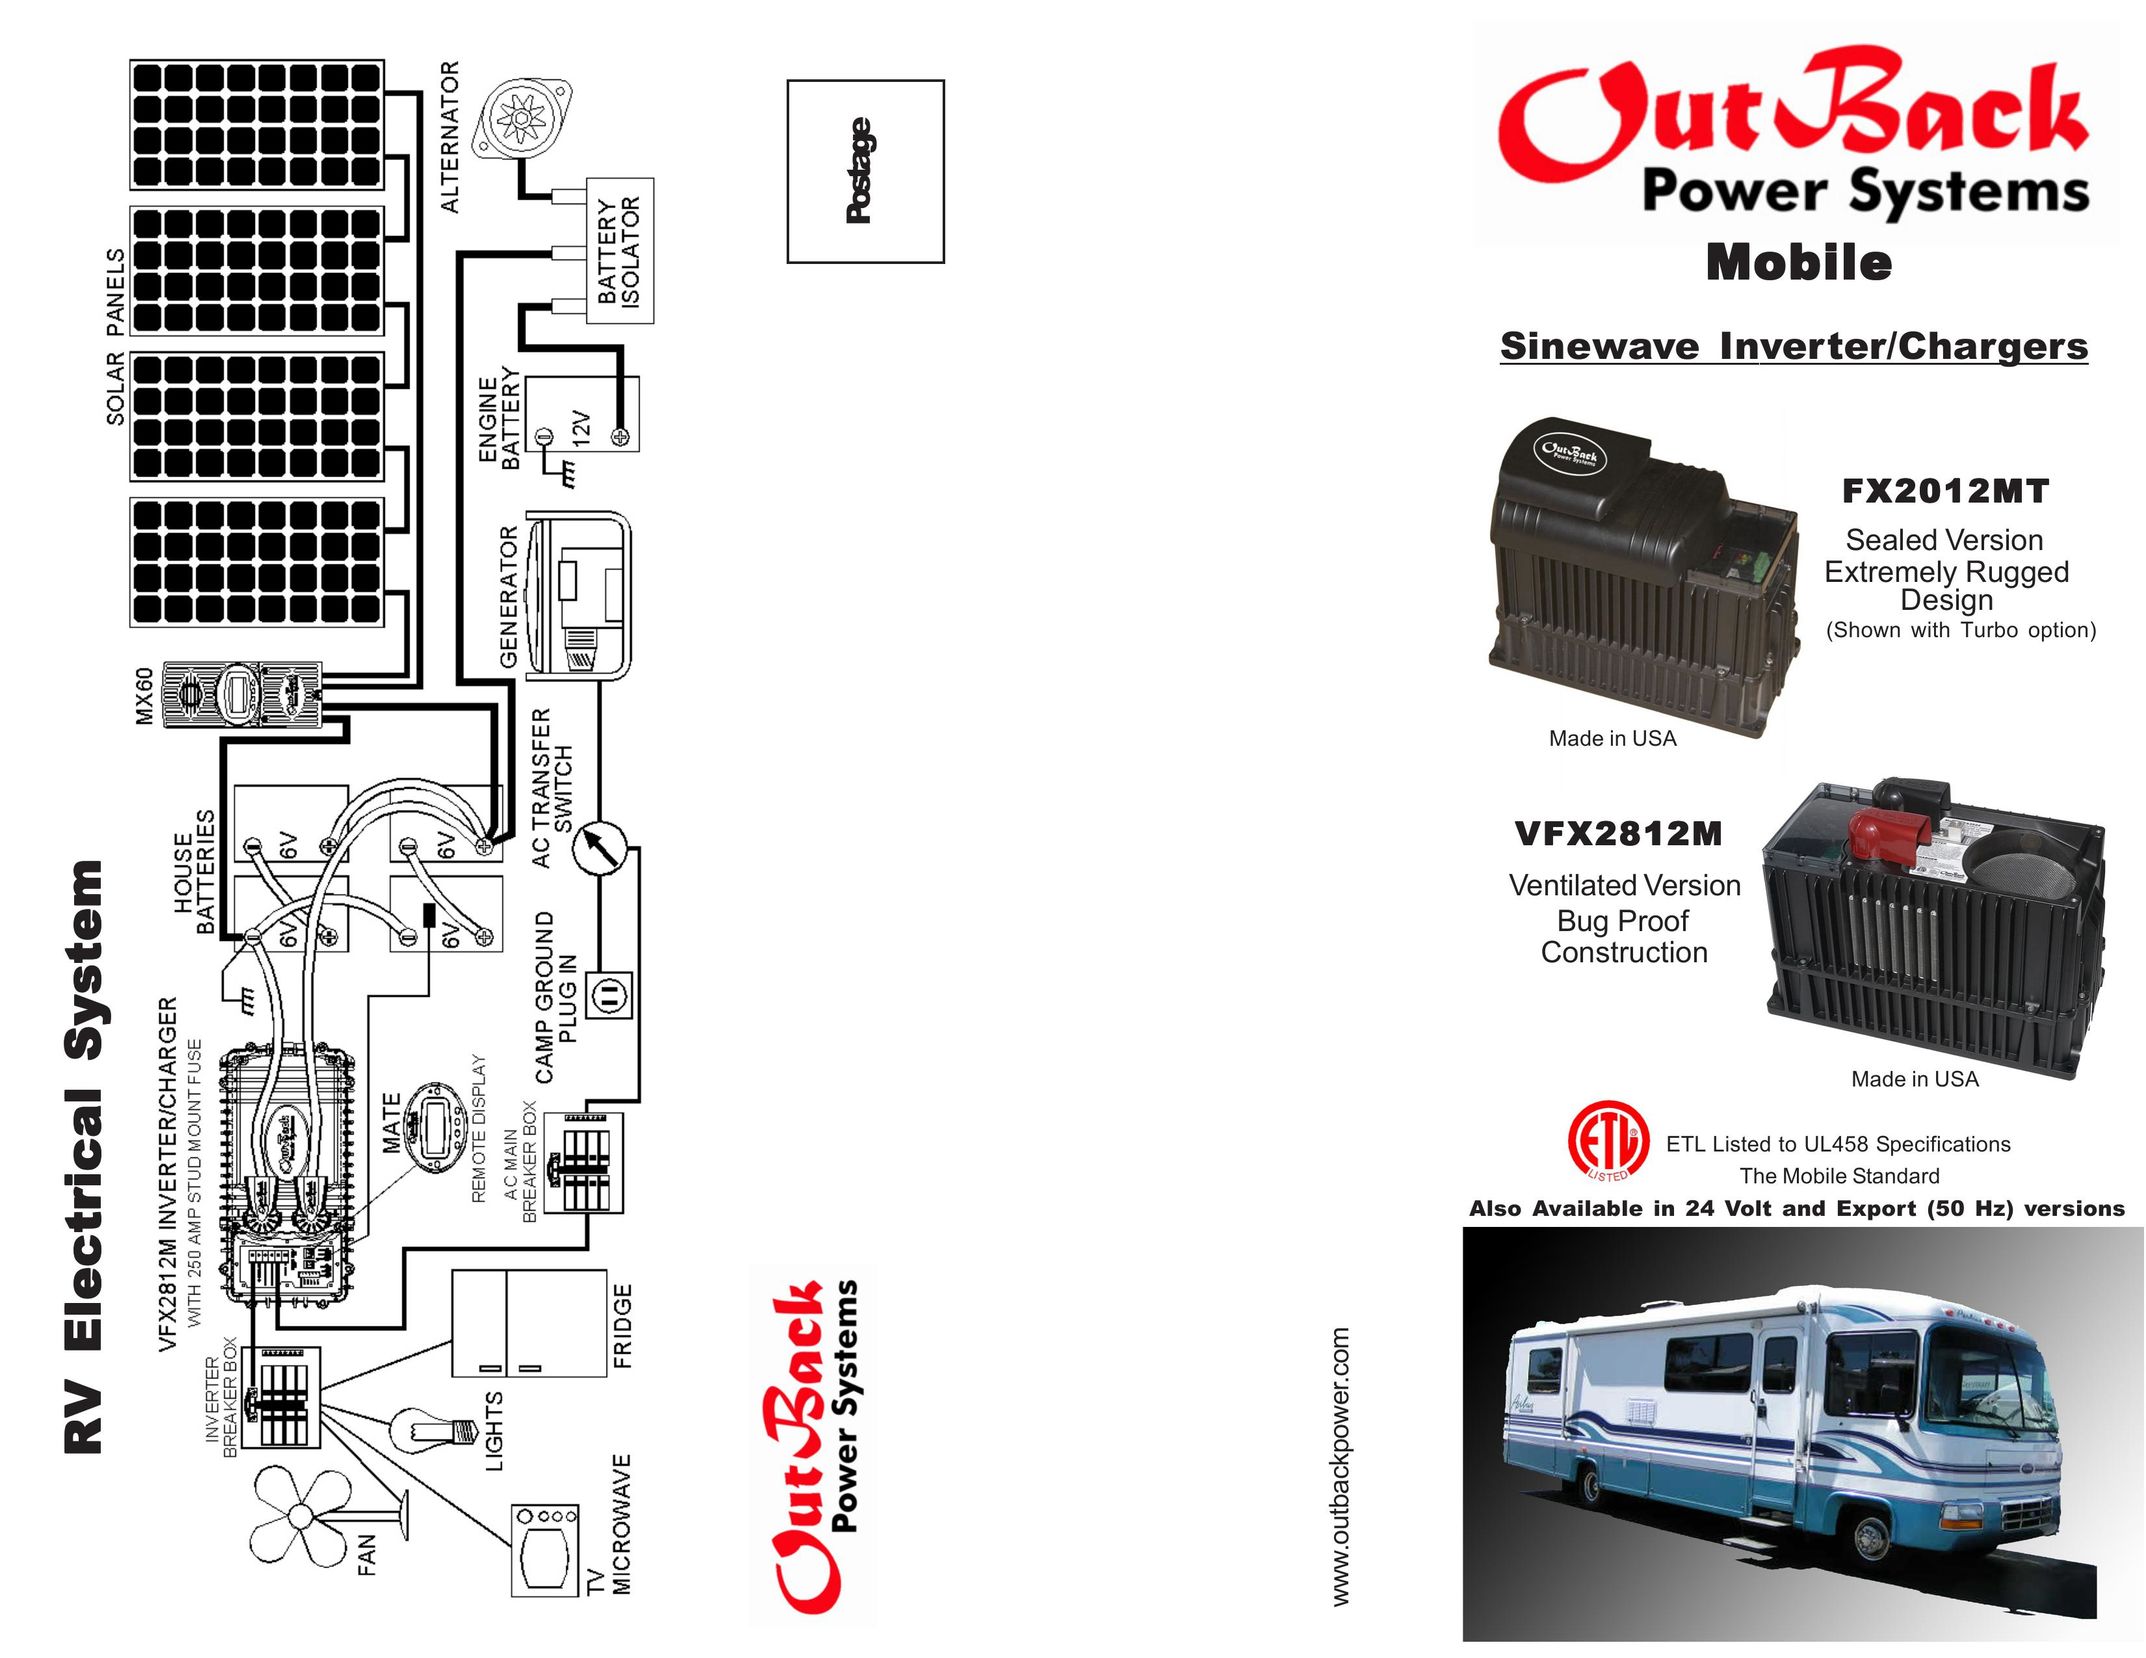 Outback Power Systems FX2012MT Power Supply User Manual